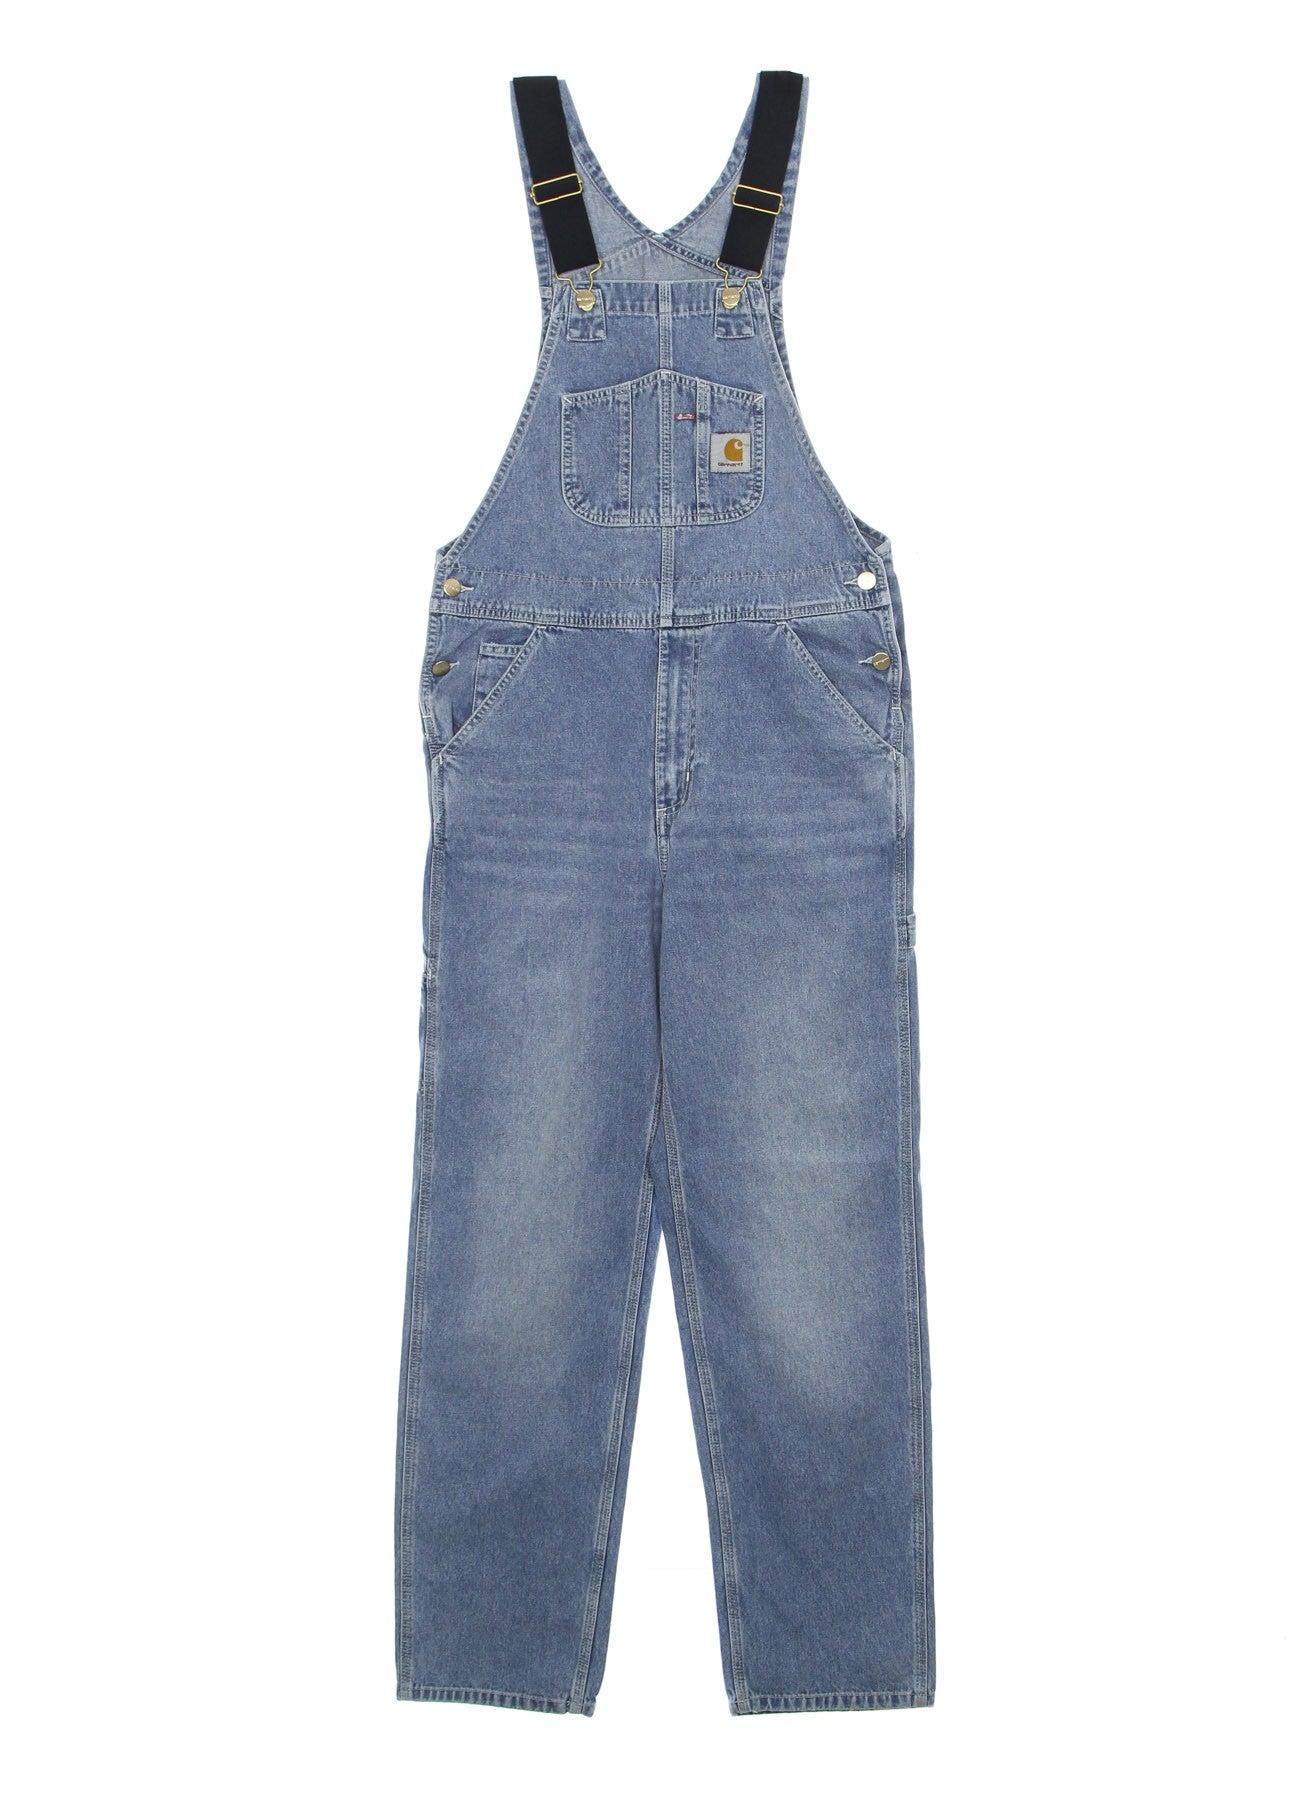 Men's Bib Overall Dungarees Blue Light True Washed